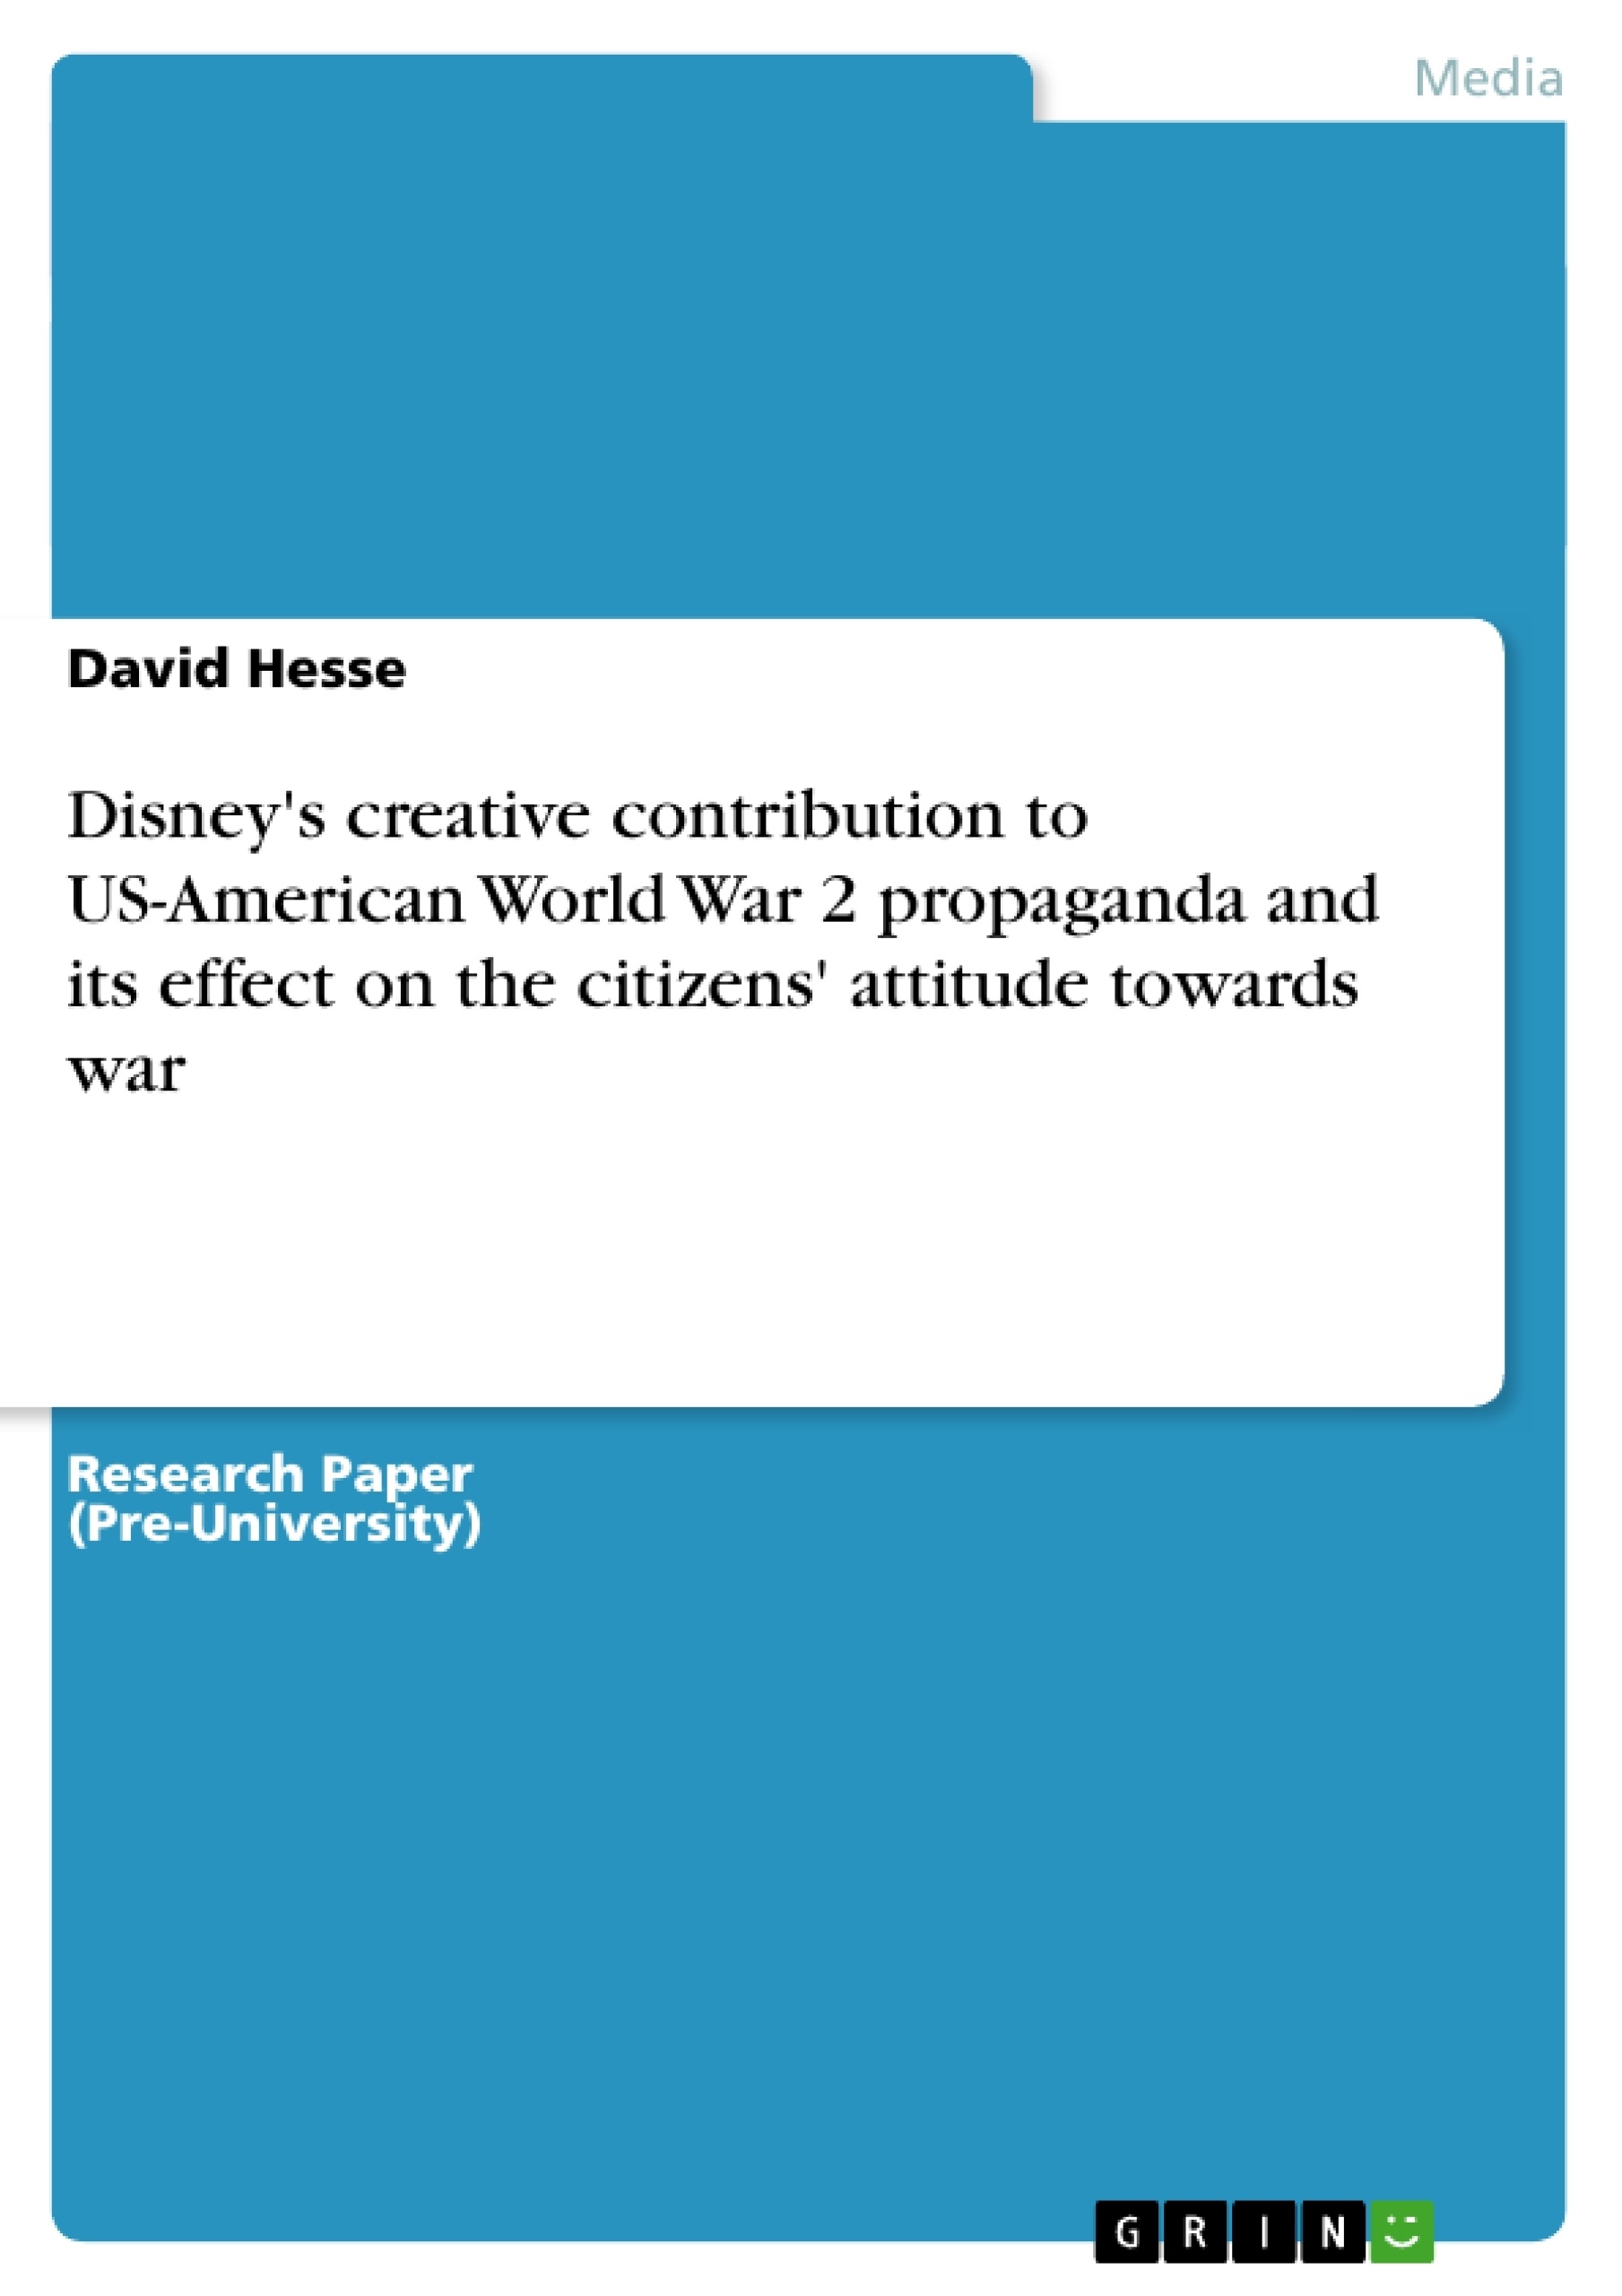 Title: Disney's creative contribution to US-American World War 2 propaganda and its effect on the citizens' attitude towards war